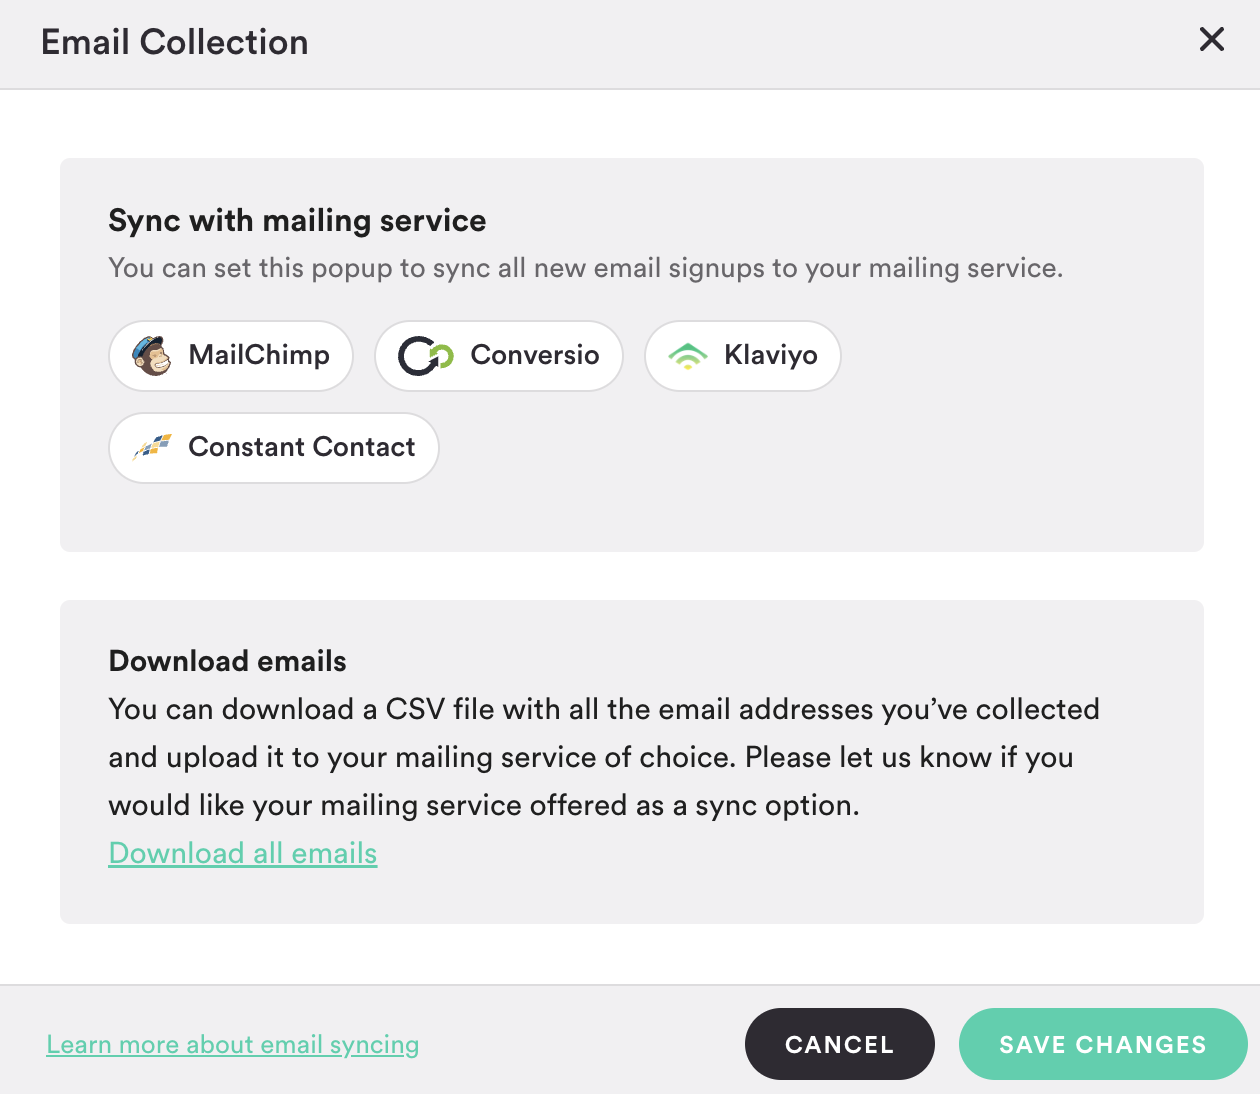 Email Collection settings where Klaviyo can be selected from a list of mailing services.